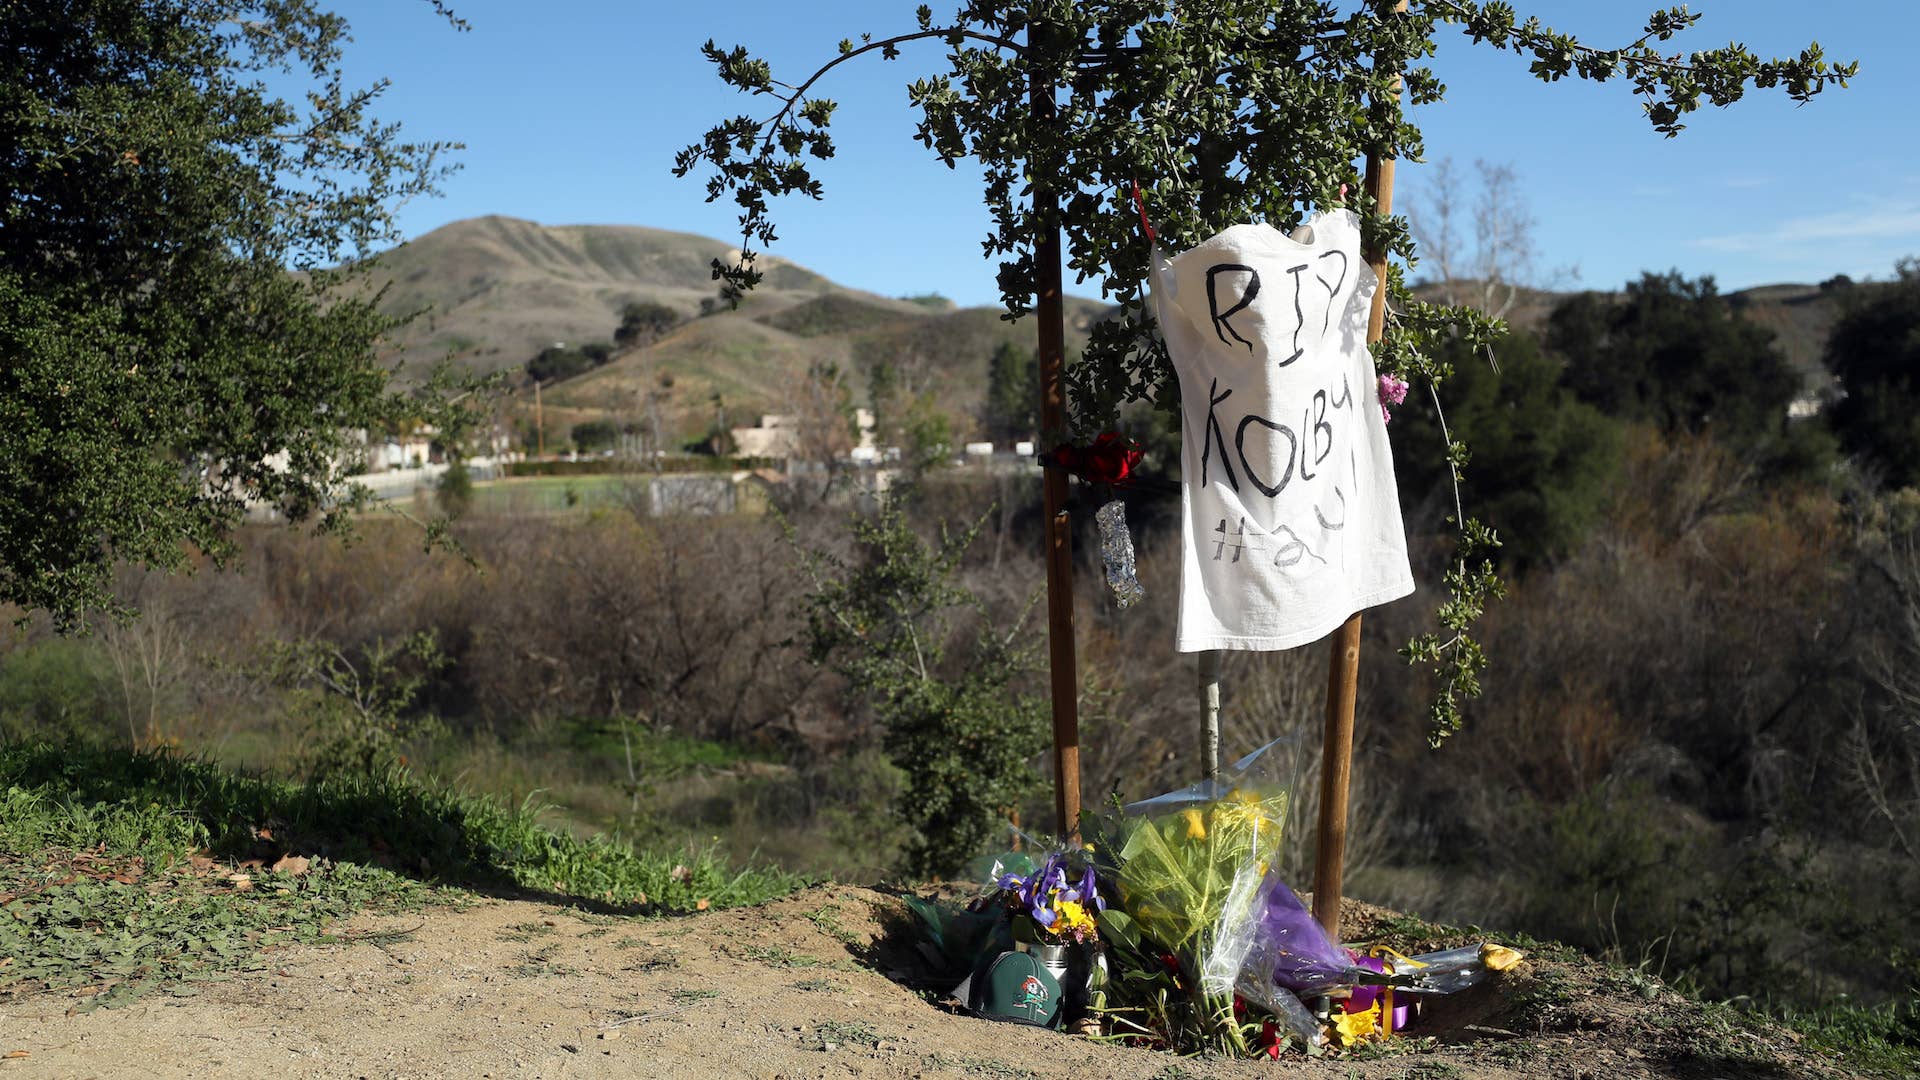 A makeshift memorial is shown near the site of the helicopter crash that killed Kobe Bryant.